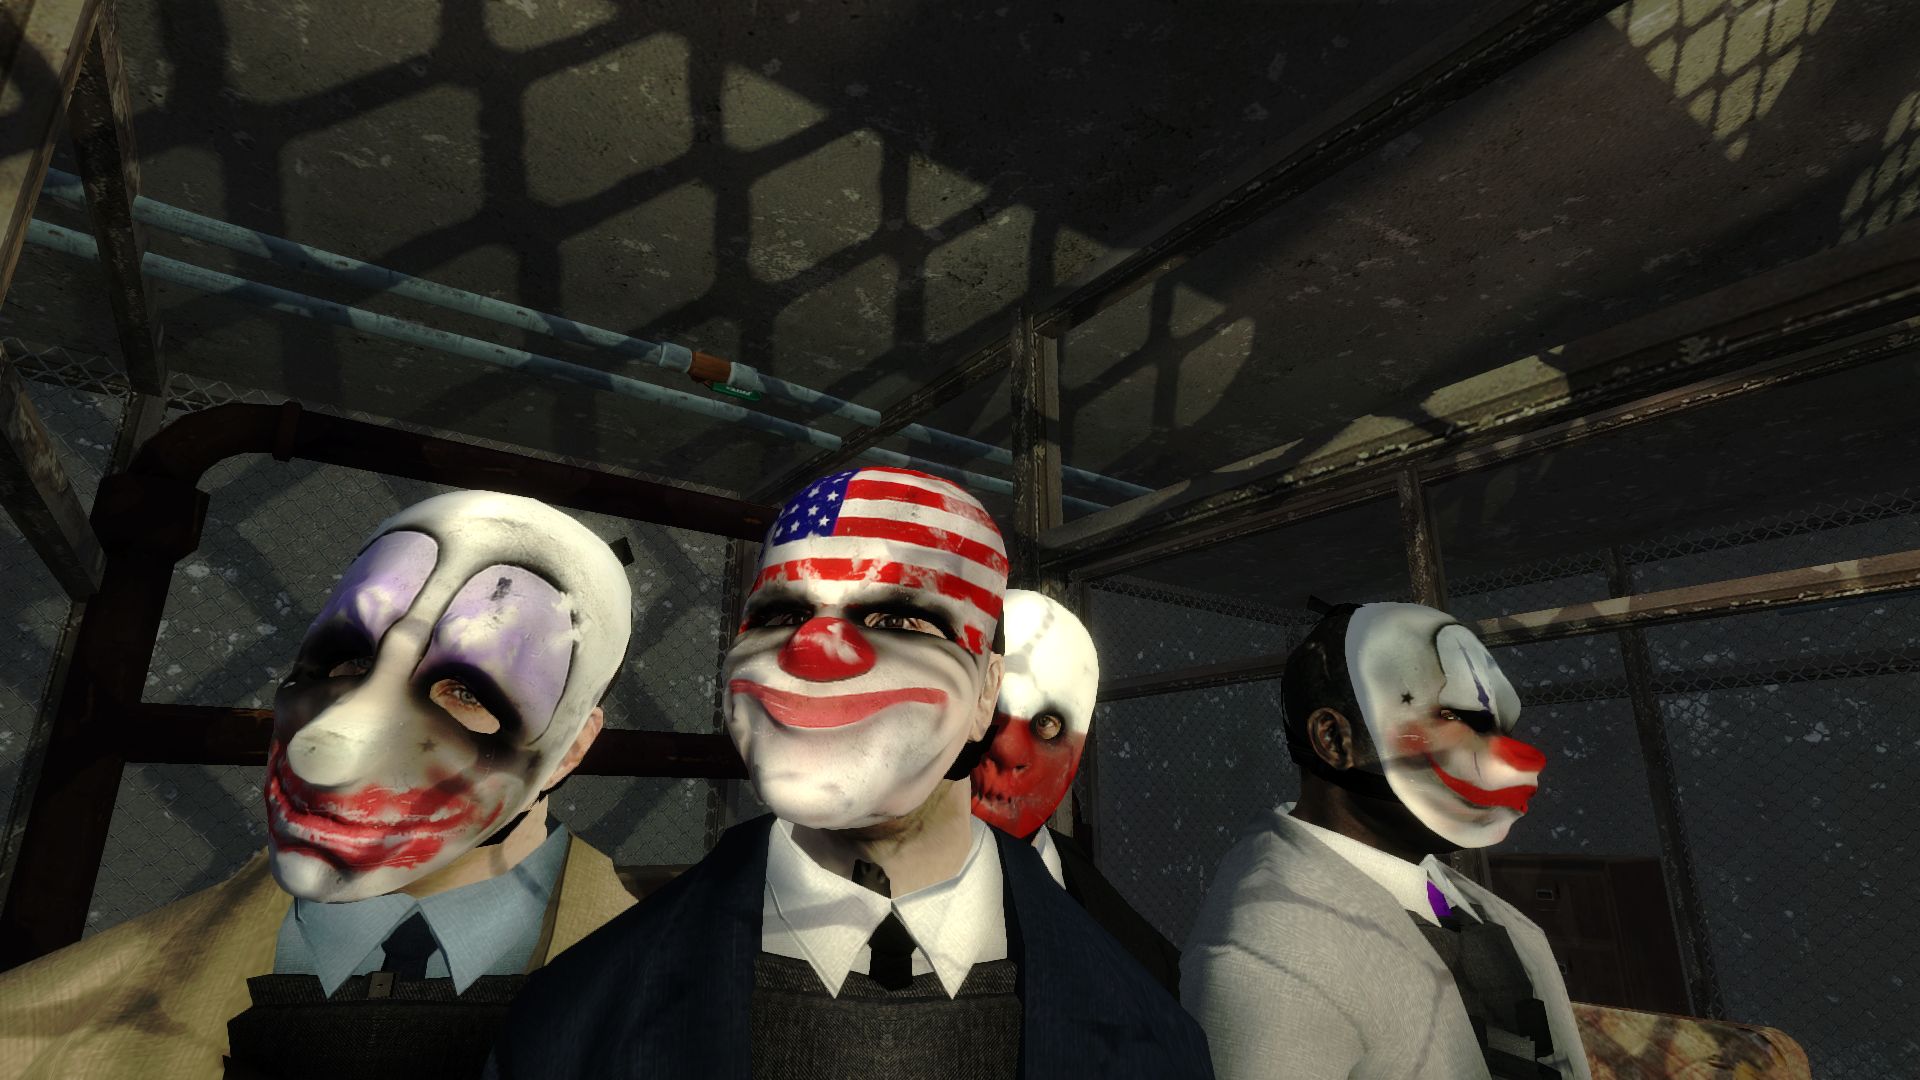 Payday The Heist Hack Payday 2 /Trainer - YouTube